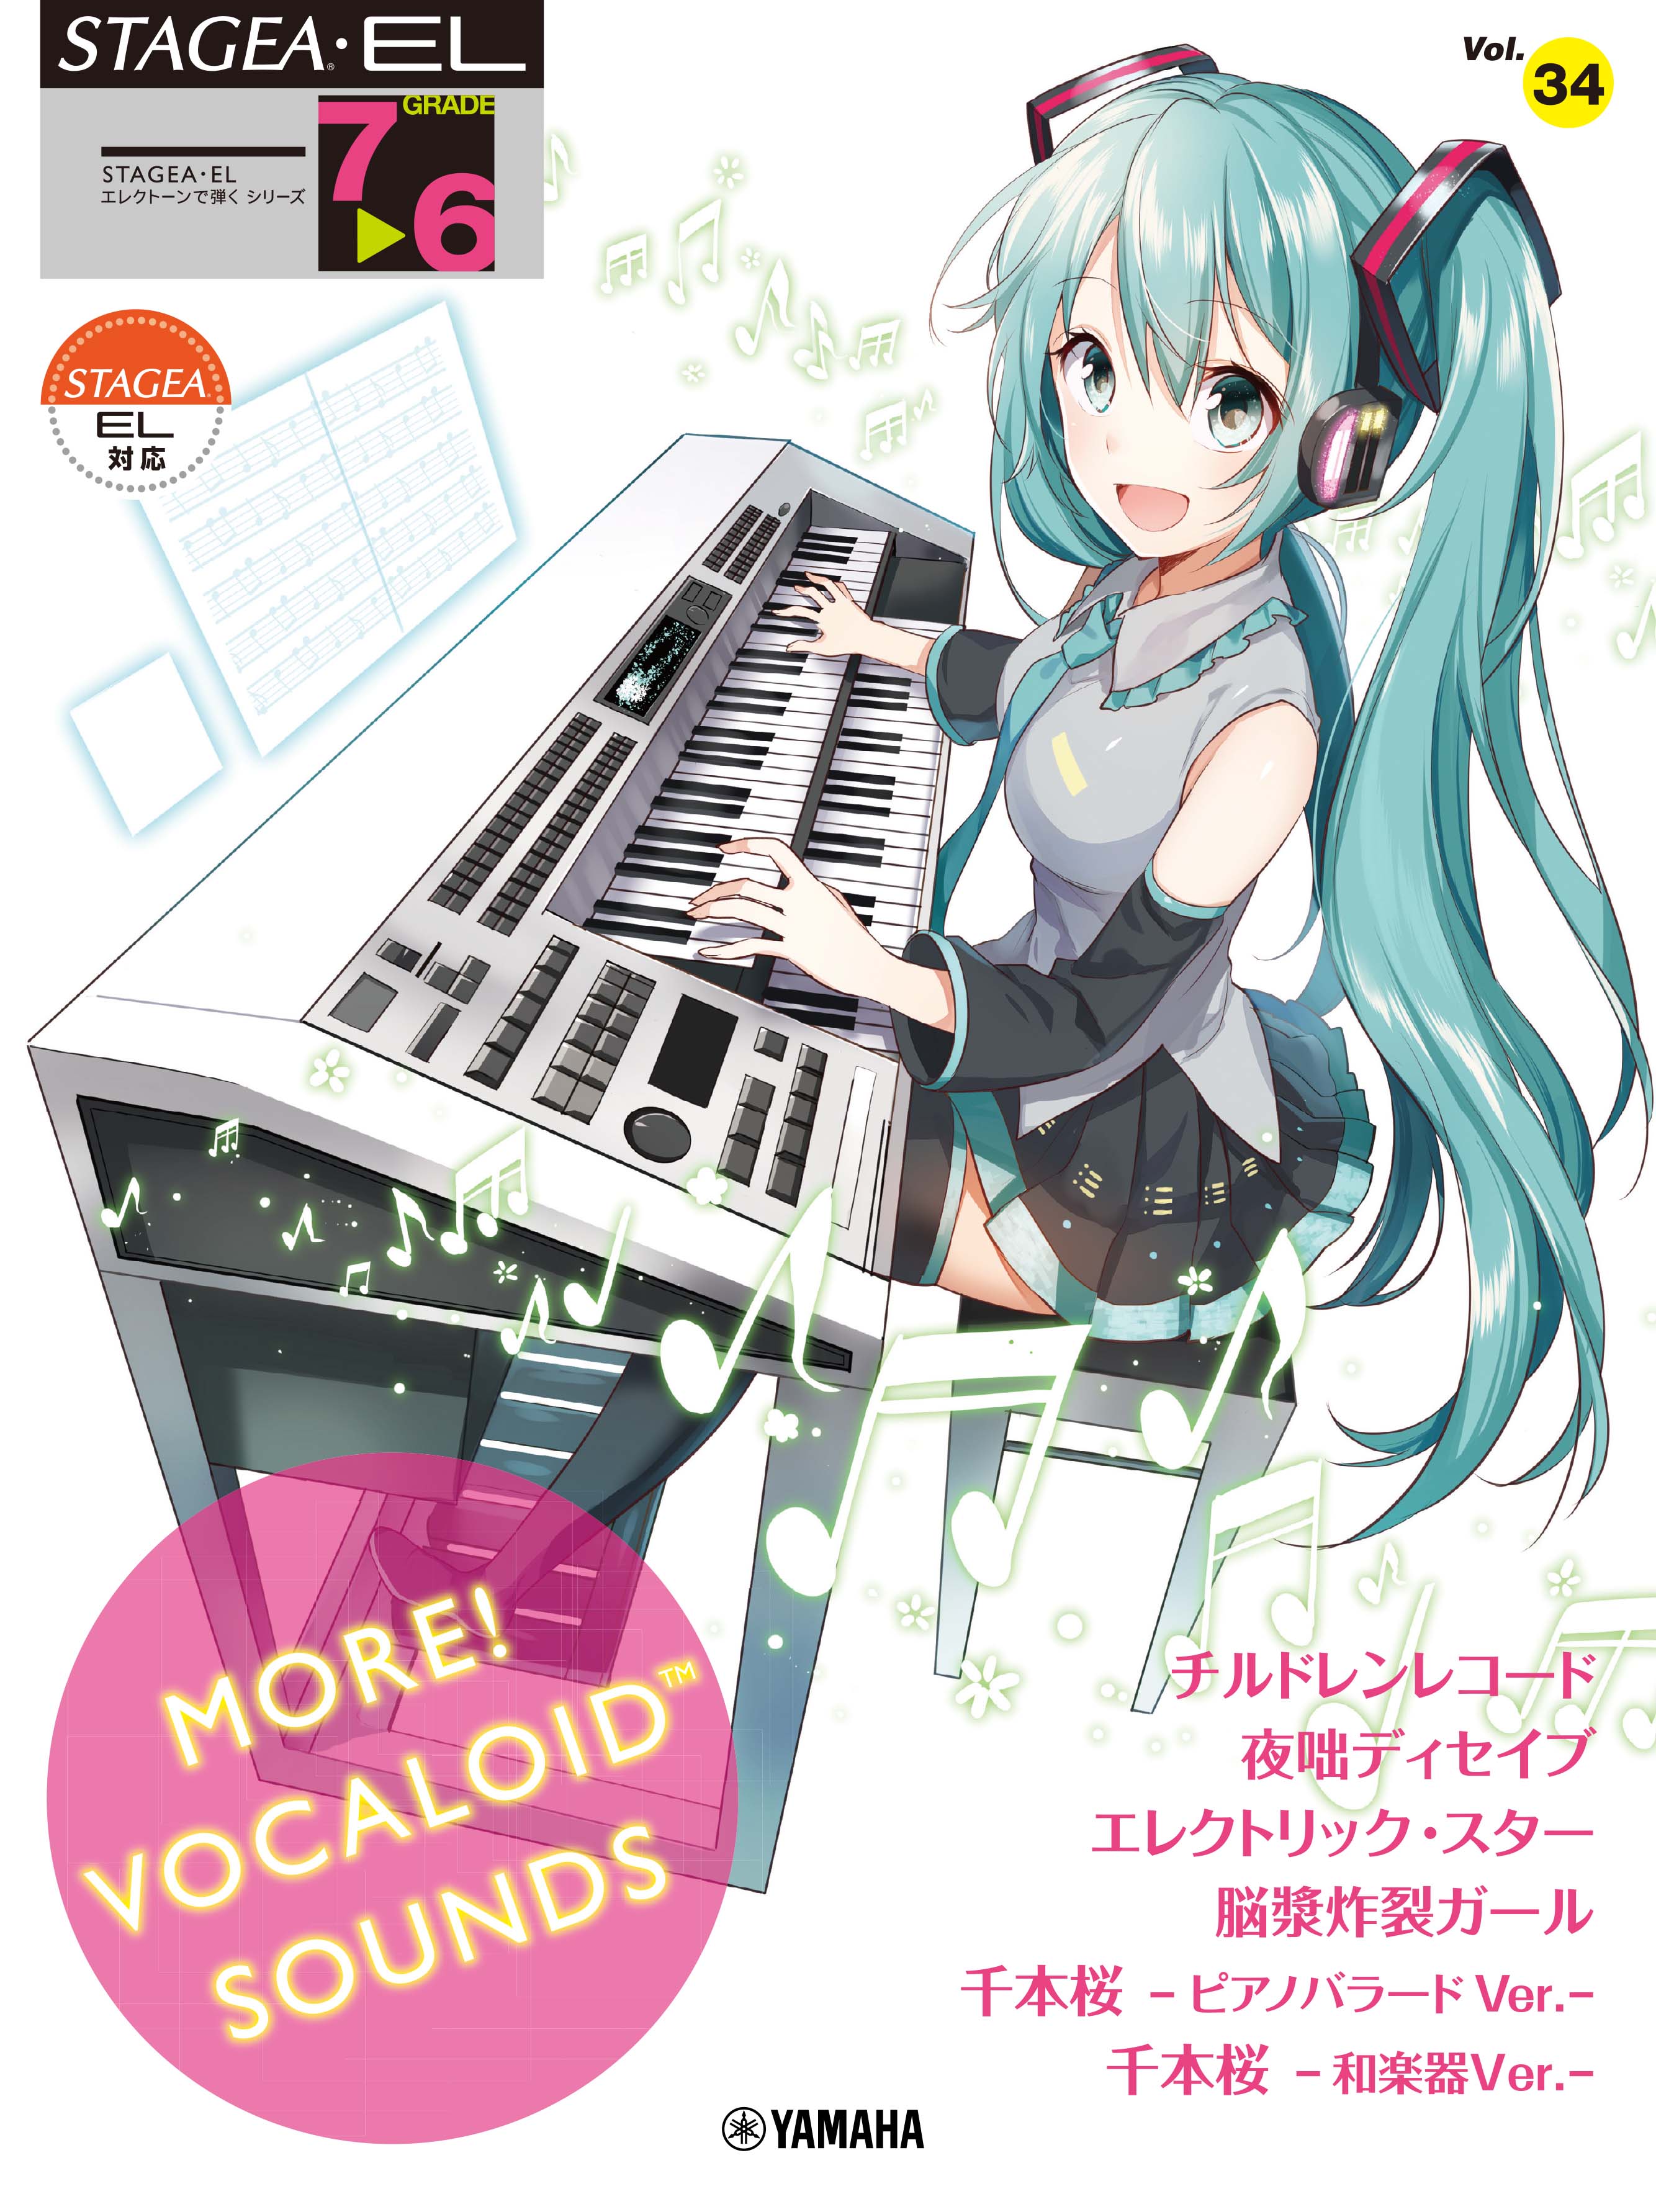 STAGEA・EL エレクトーンで弾く 7～6級 Vol.34 MORE!VOCALOID SOUNDS | ヤマハの楽譜通販サイト Sheet  Music Store